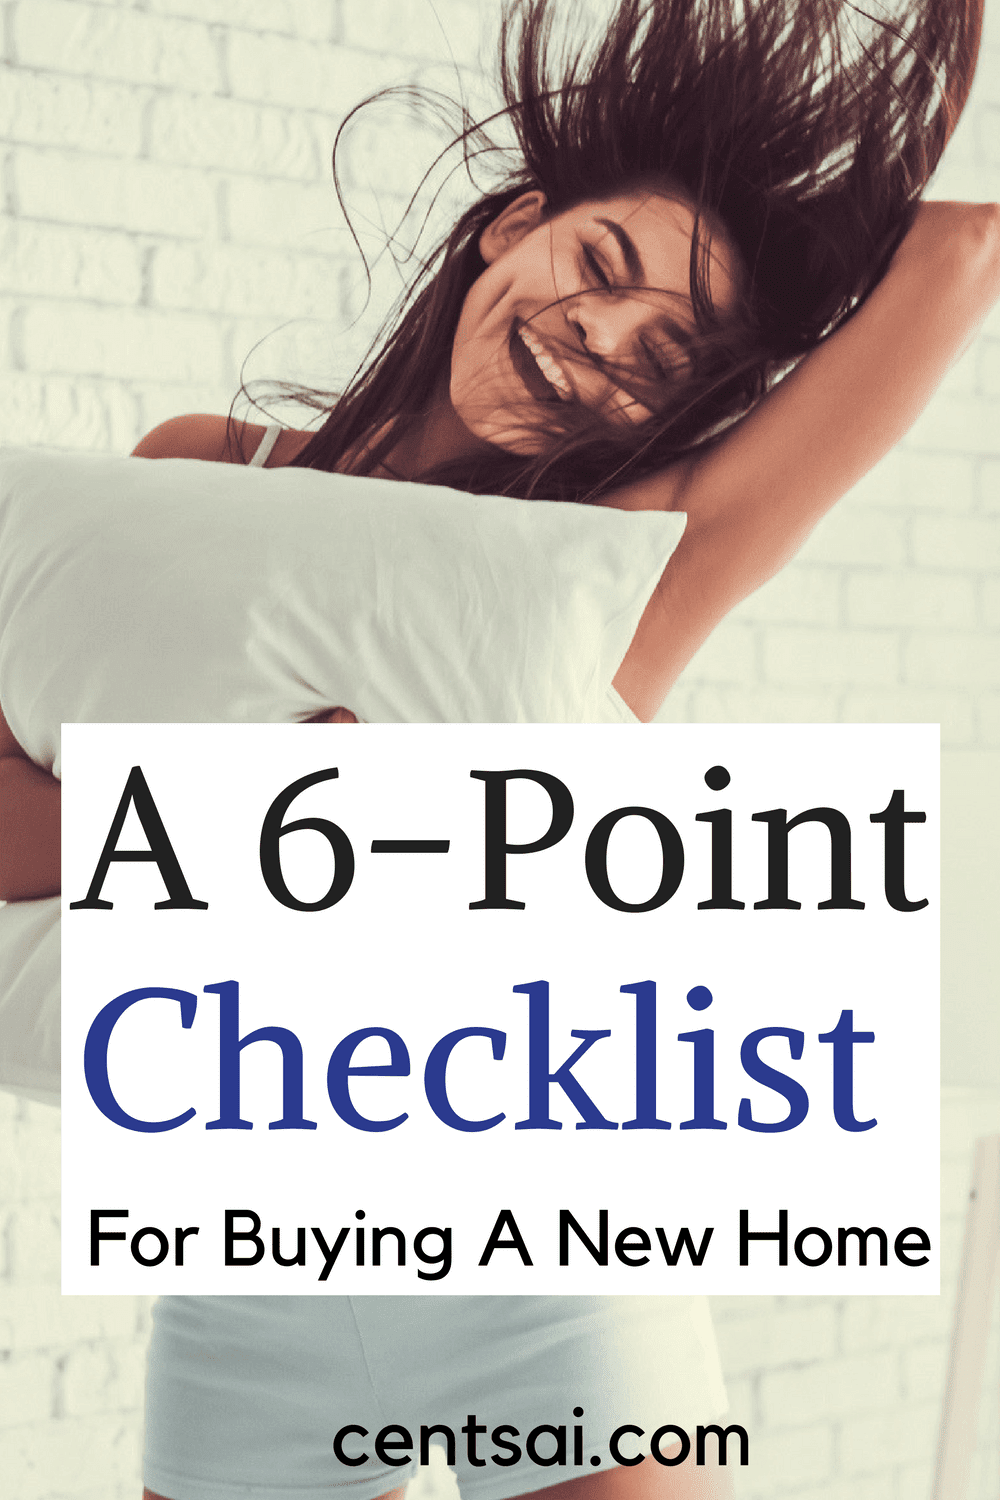 A 6-Point Checklist For Buying A New Home